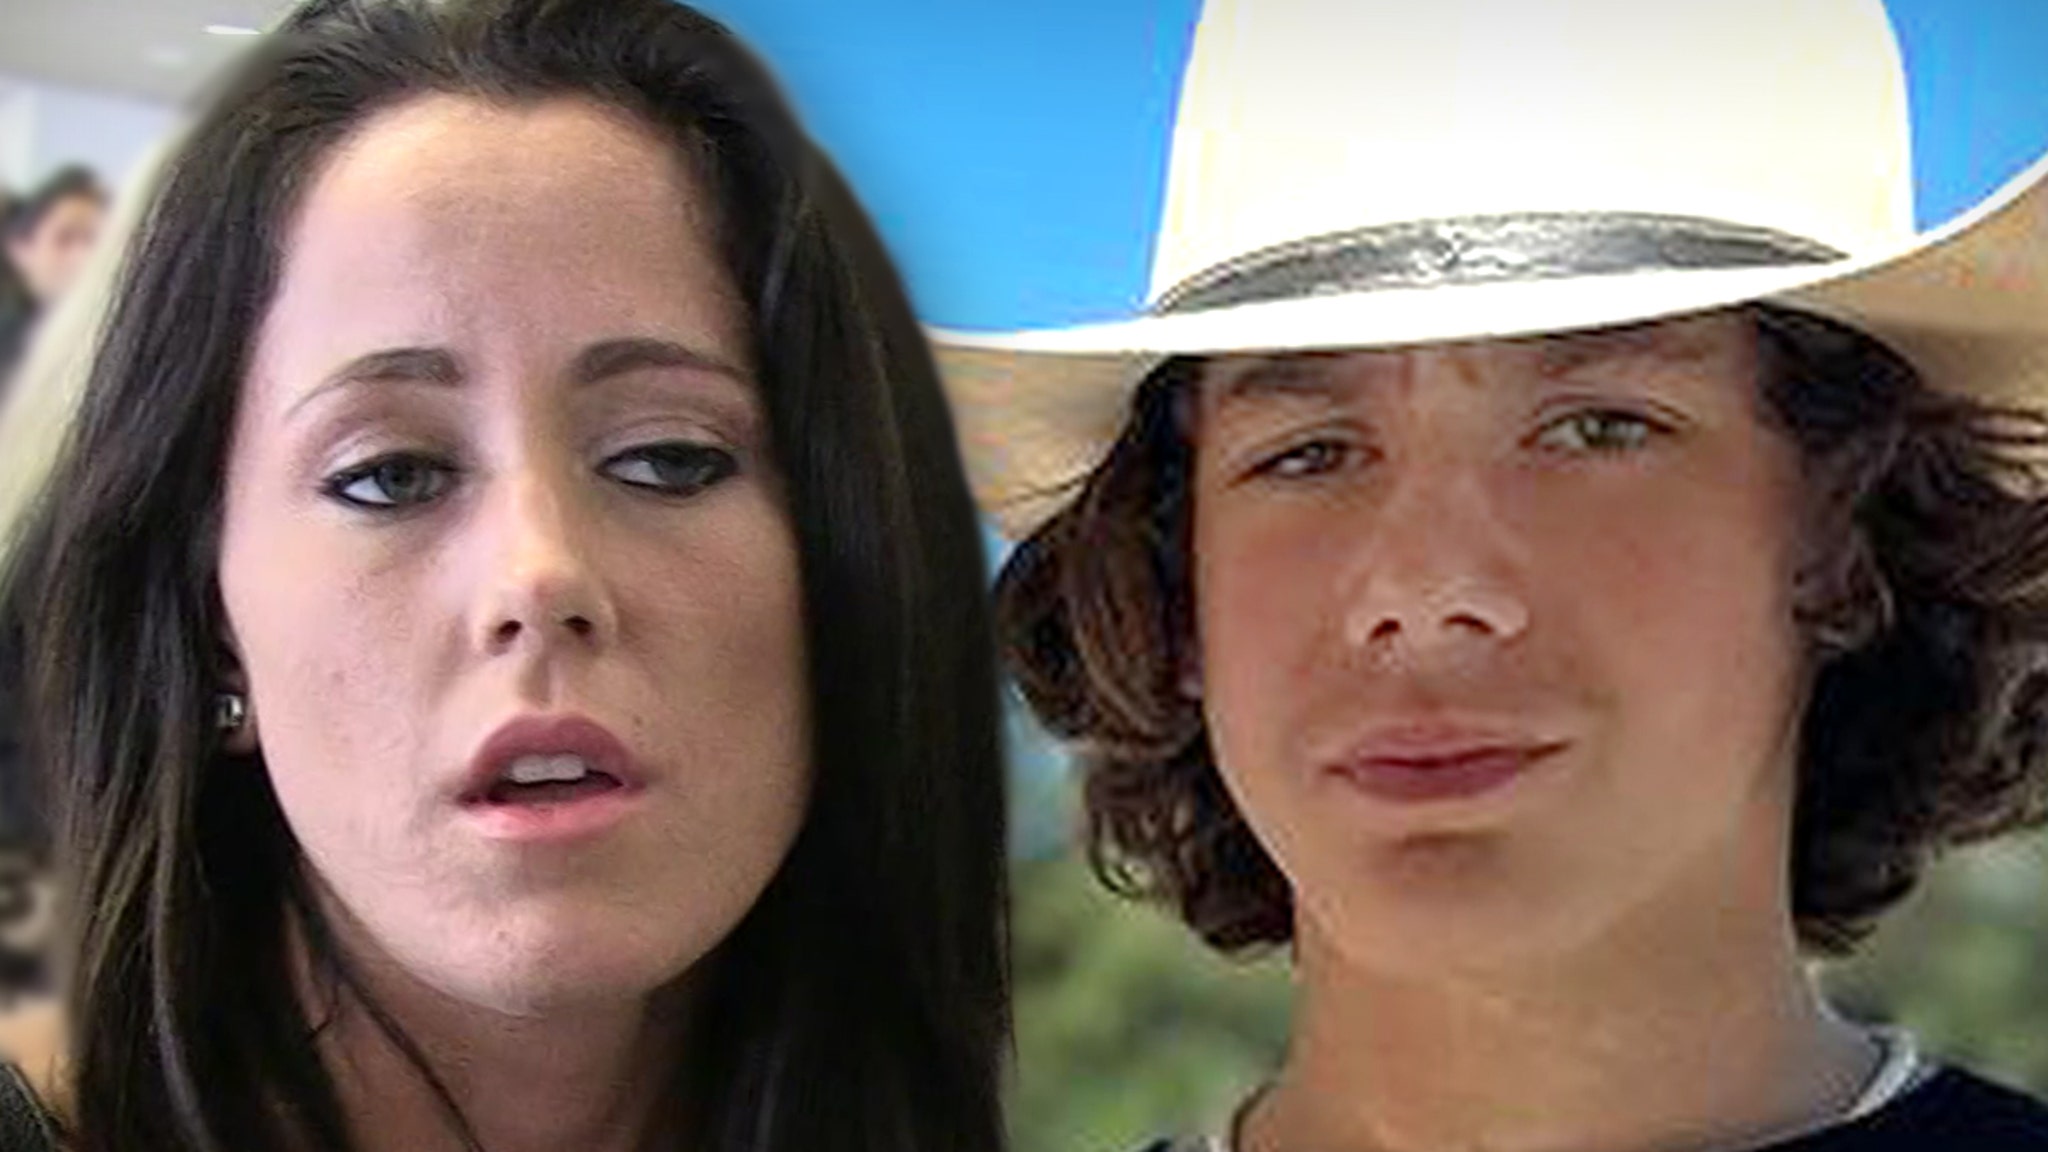 Jenelle Evans Not In Contact With Son Jace, Happiest He’s Been in Awhile